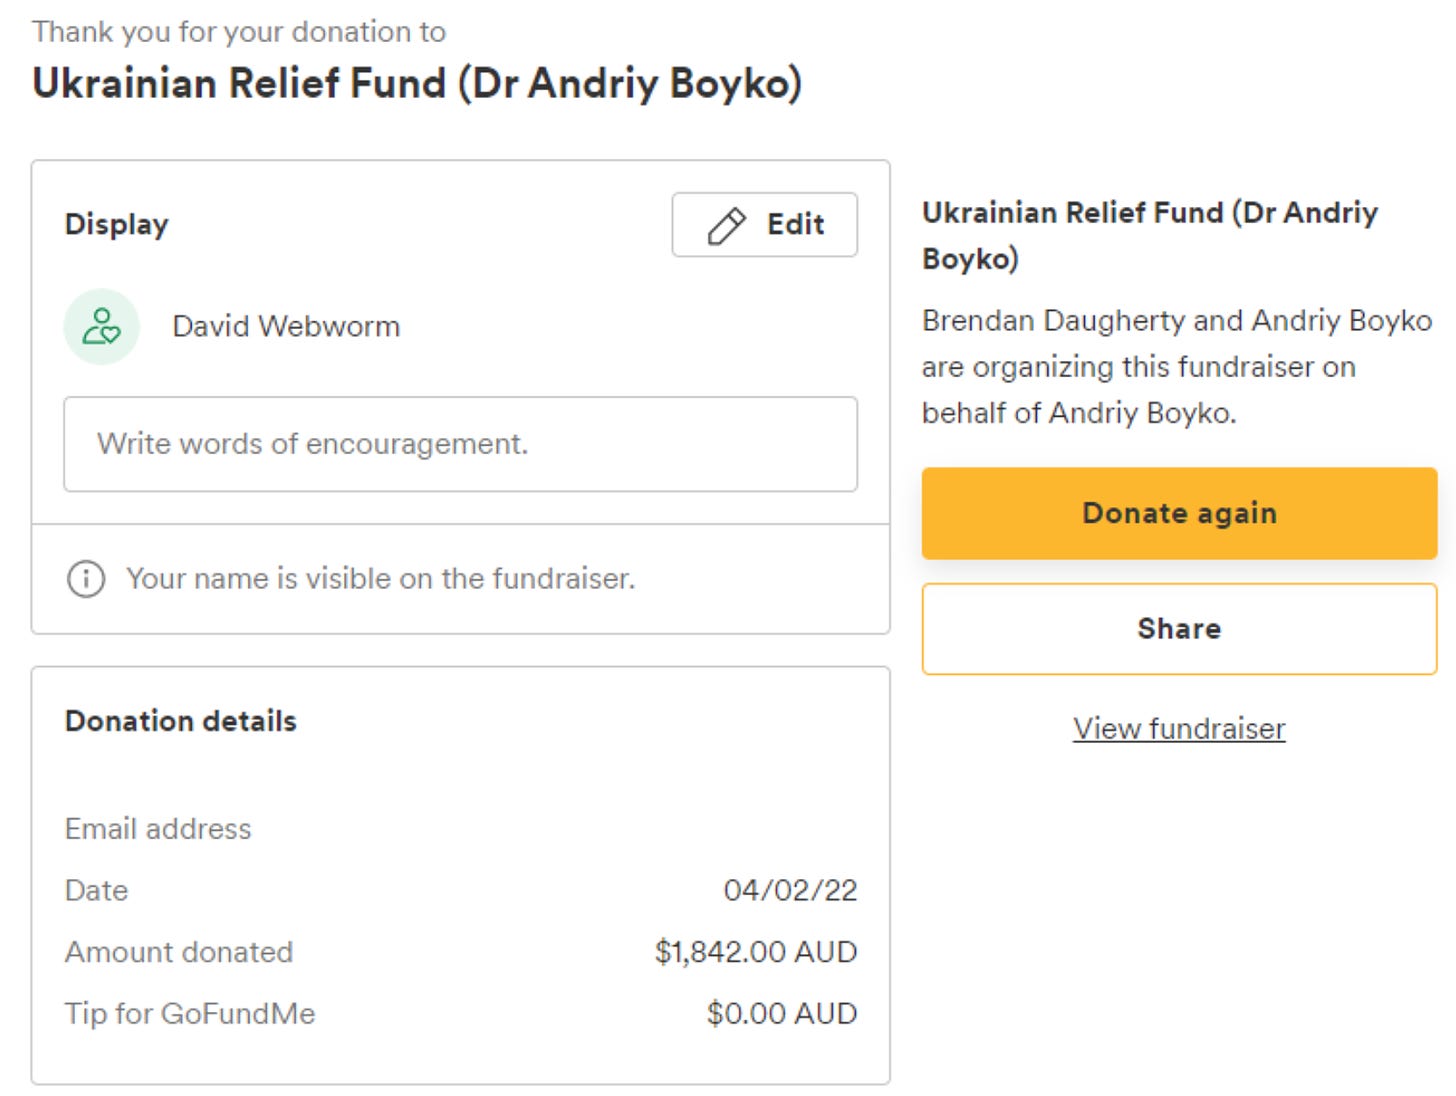 A screenshot showing the donation to the GiveALittle